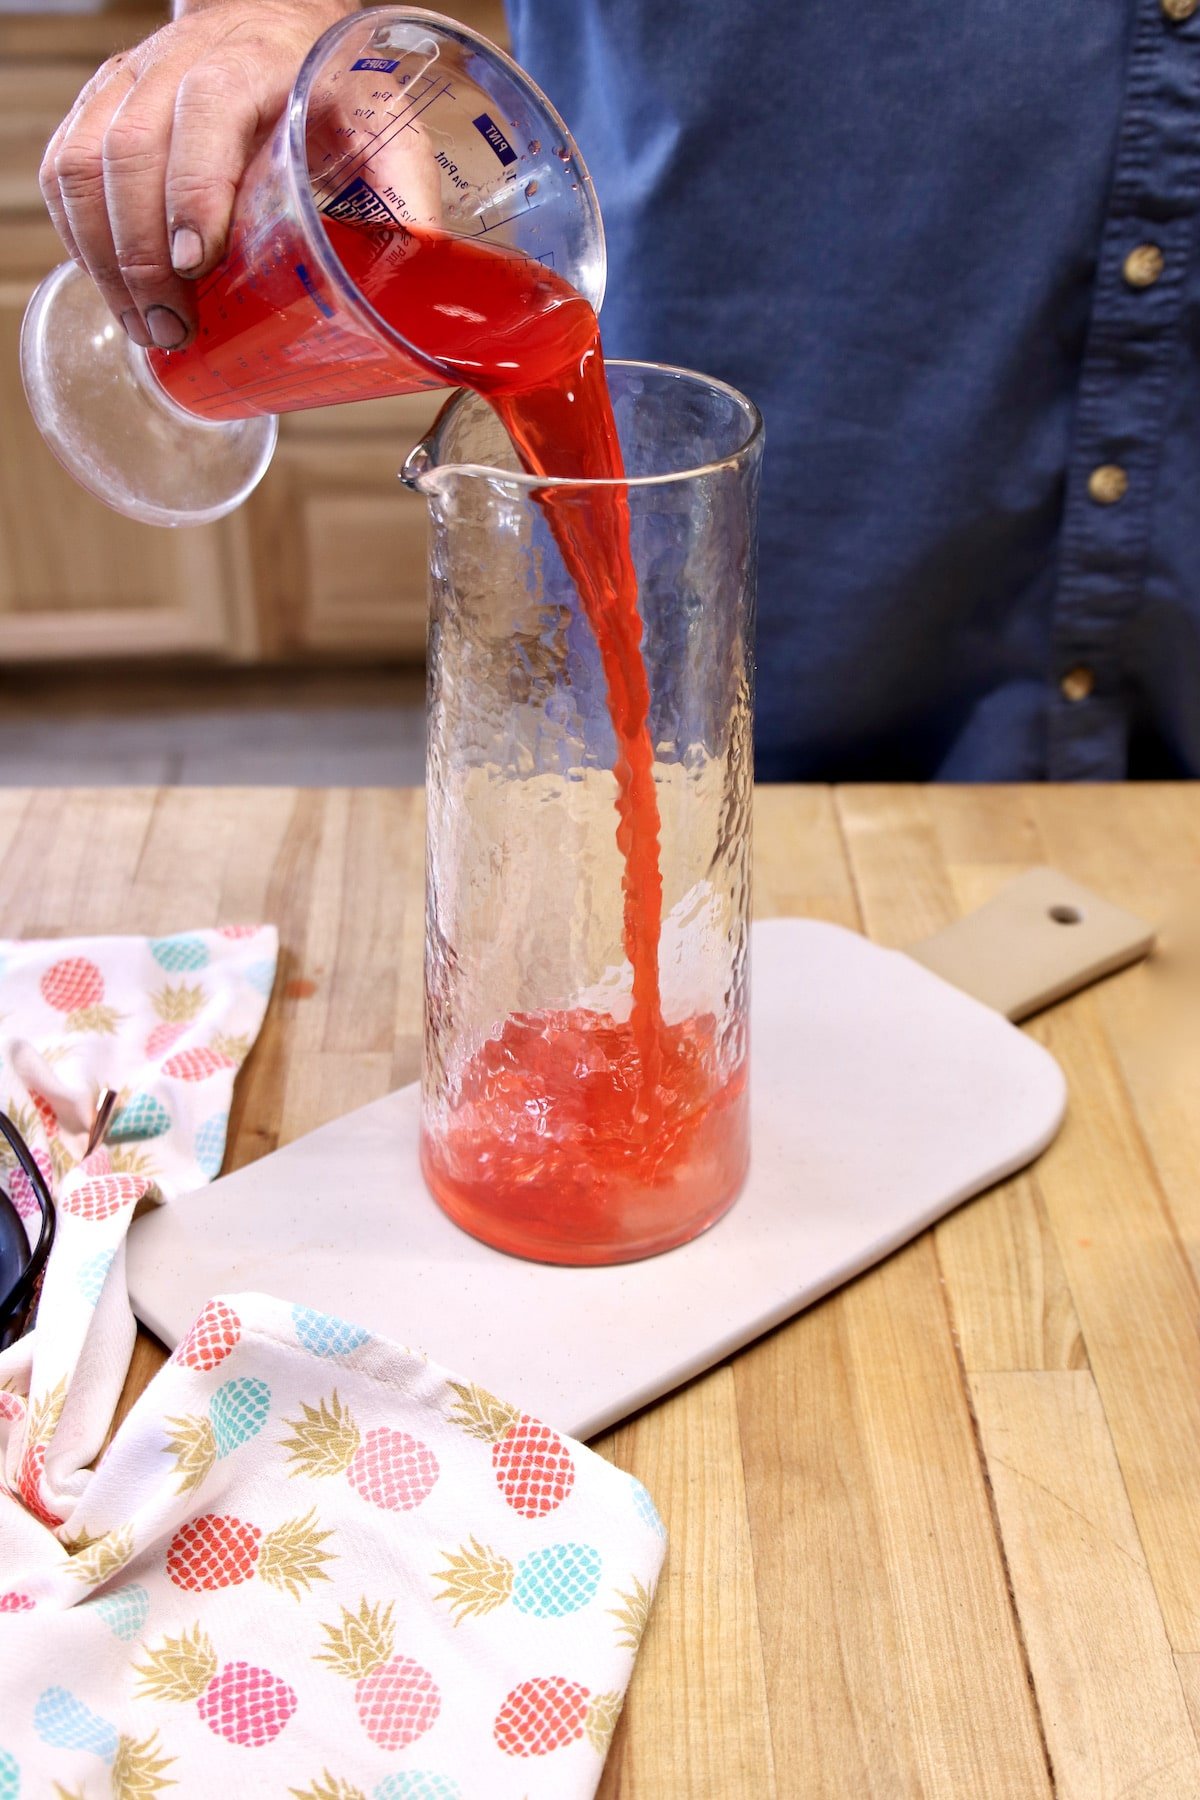 Pouring Hawaiian Punch into a pitcher.